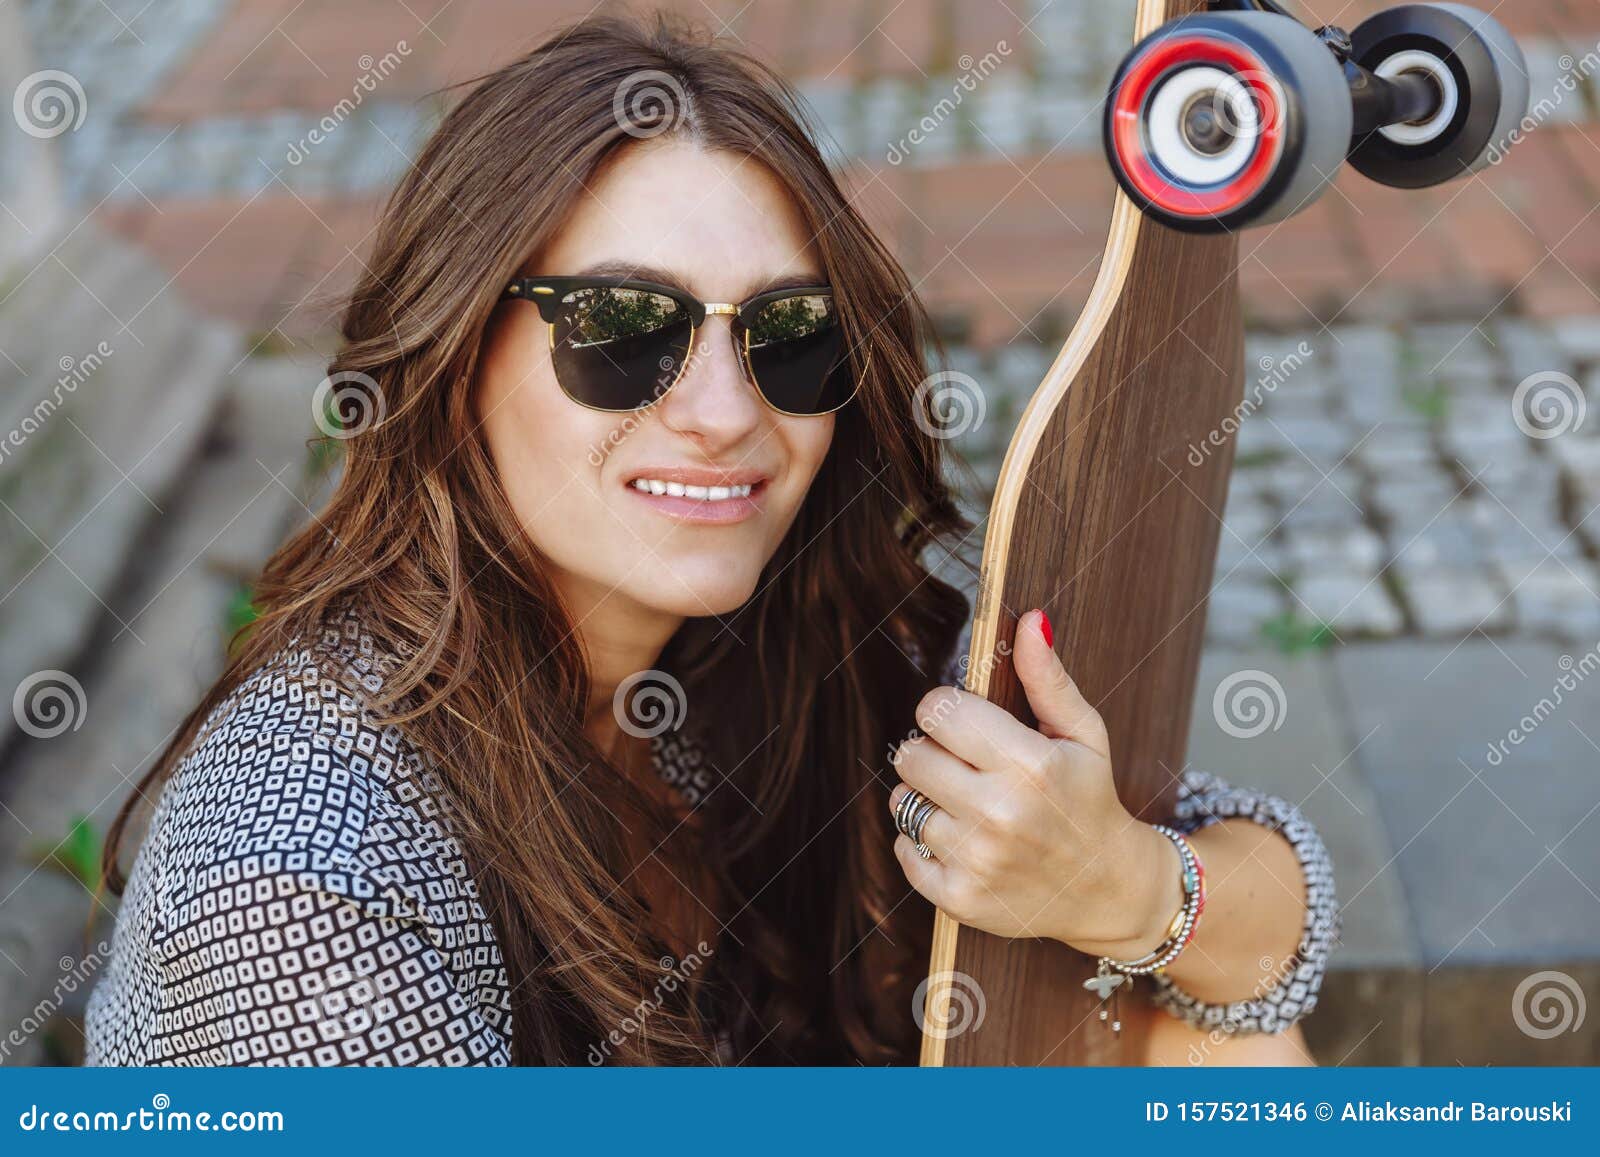 Close Up Portrait Of Beautiful Young Woman Sitting On The Ground And Holding A Longboard In The 